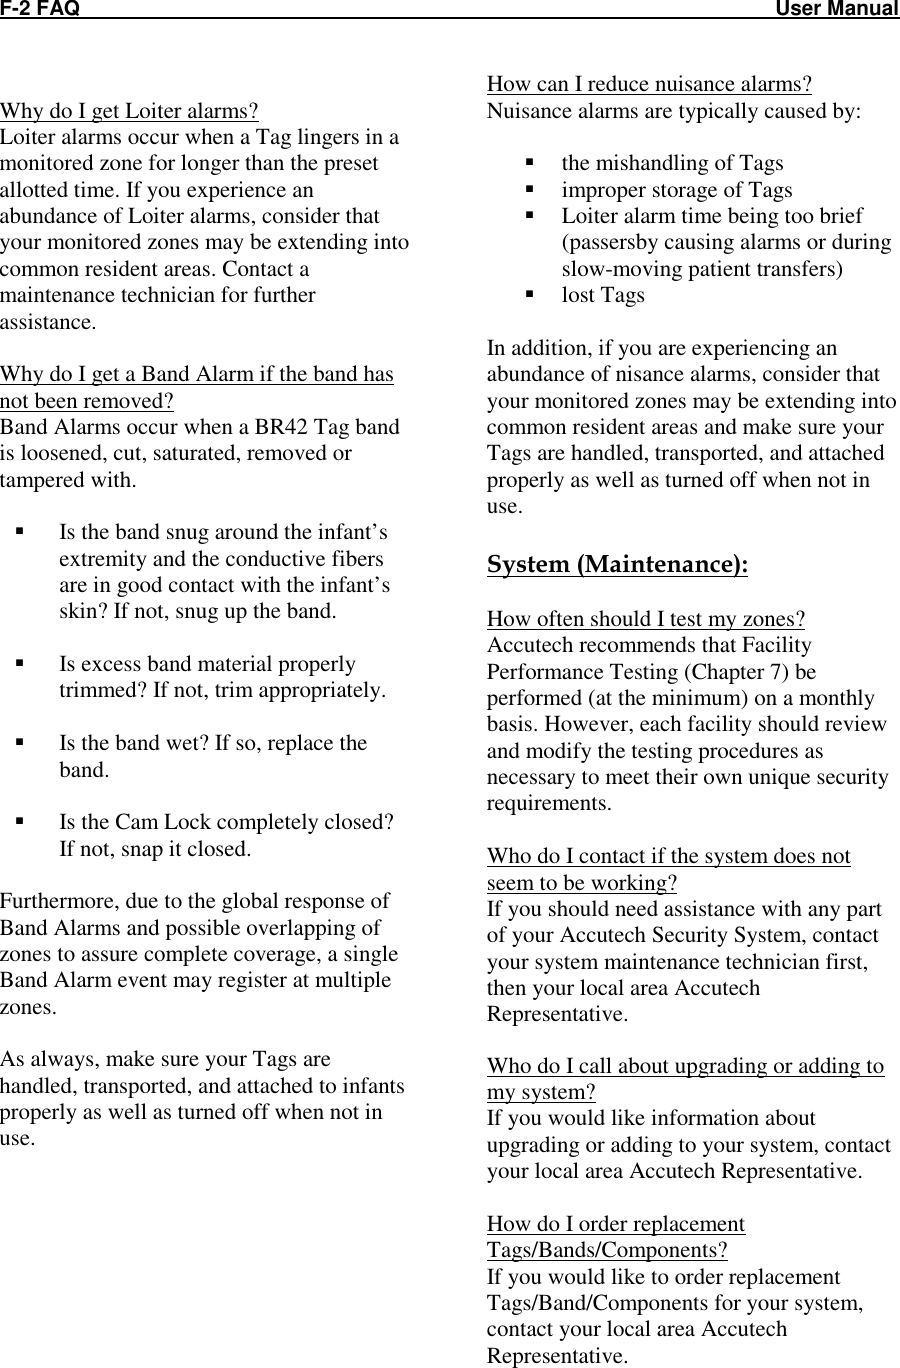 F-2 FAQ    User Manual  Why do I get Loiter alarms? Loiter alarms occur when a Tag lingers in a monitored zone for longer than the preset allotted time. If you experience an abundance of Loiter alarms, consider that your monitored zones may be extending into common resident areas. Contact a maintenance technician for further assistance.  Why do I get a Band Alarm if the band has not been removed? Band Alarms occur when a BR42 Tag band is loosened, cut, saturated, removed or tampered with.    Is the band snug around the infant’s extremity and the conductive fibers are in good contact with the infant’s skin? If not, snug up the band.   Is excess band material properly trimmed? If not, trim appropriately.   Is the band wet? If so, replace the band.   Is the Cam Lock completely closed? If not, snap it closed.  Furthermore, due to the global response of Band Alarms and possible overlapping of zones to assure complete coverage, a single Band Alarm event may register at multiple zones.  As always, make sure your Tags are handled, transported, and attached to infants properly as well as turned off when not in use.   How can I reduce nuisance alarms? Nuisance alarms are typically caused by:   the mishandling of Tags  improper storage of Tags  Loiter alarm time being too brief (passersby causing alarms or during slow-moving patient transfers)  lost Tags  In addition, if you are experiencing an abundance of nisance alarms, consider that your monitored zones may be extending into common resident areas and make sure your Tags are handled, transported, and attached properly as well as turned off when not in use.  System (Maintenance):  How often should I test my zones? Accutech recommends that Facility Performance Testing (Chapter 7) be performed (at the minimum) on a monthly basis. However, each facility should review and modify the testing procedures as necessary to meet their own unique security requirements.   Who do I contact if the system does not seem to be working? If you should need assistance with any part of your Accutech Security System, contact your system maintenance technician first, then your local area Accutech Representative.  Who do I call about upgrading or adding to my system? If you would like information about upgrading or adding to your system, contact your local area Accutech Representative.    How do I order replacement Tags/Bands/Components? If you would like to order replacement Tags/Band/Components for your system, contact your local area Accutech Representative. 